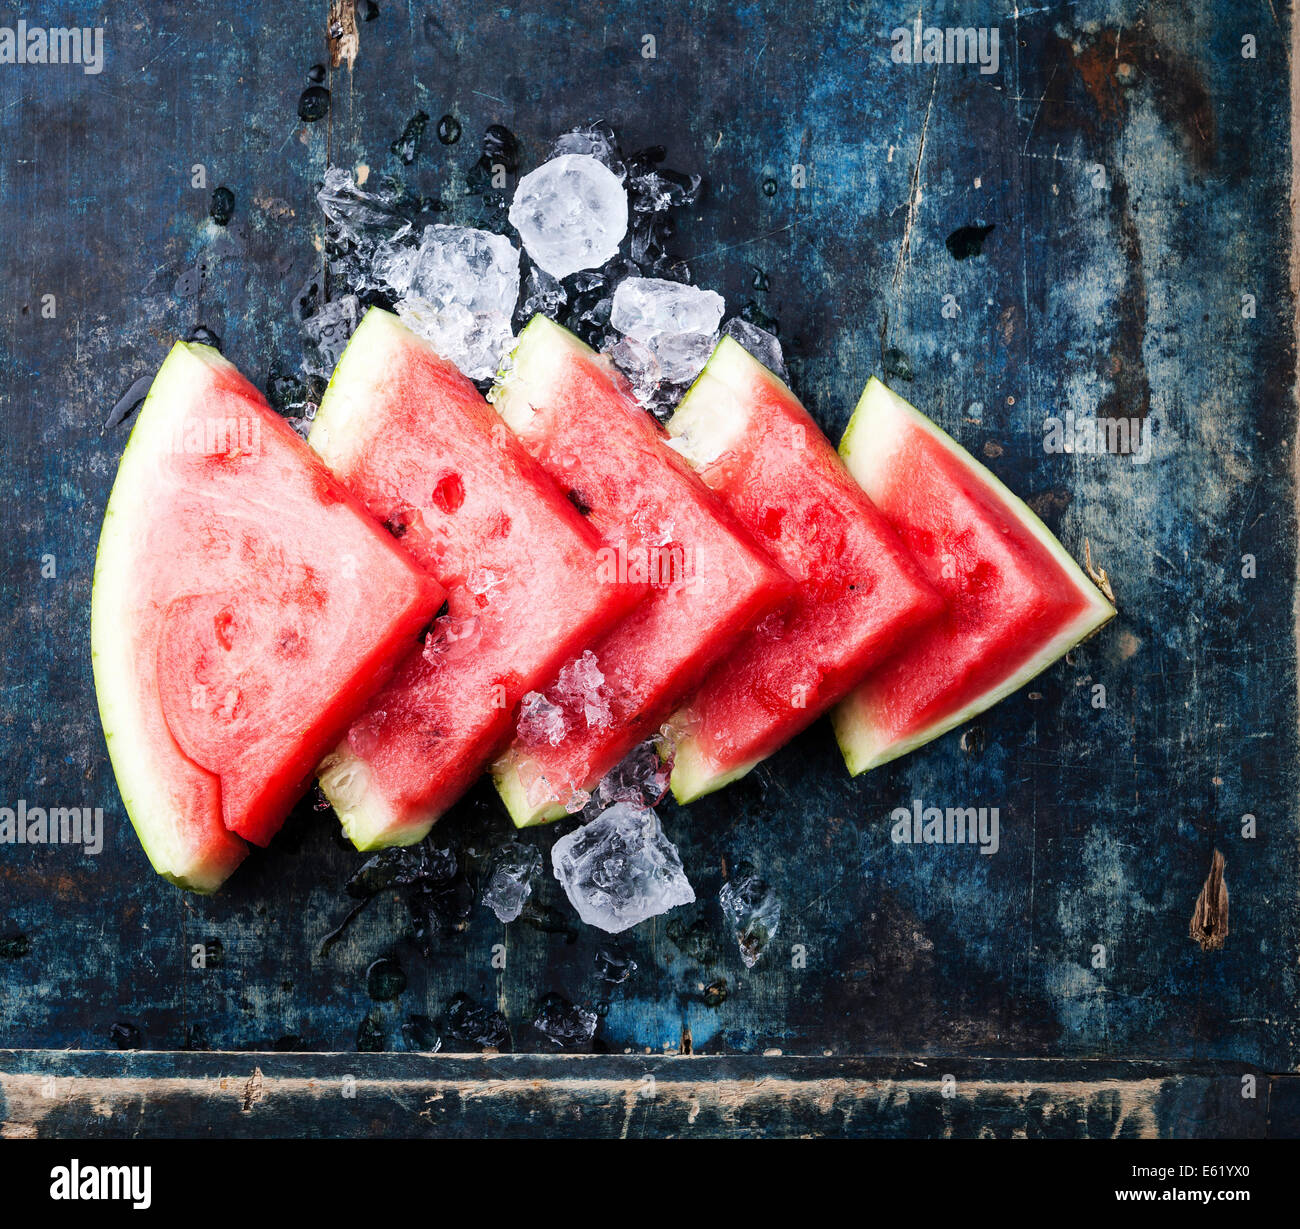 Watermelon slices and ice on blue background Stock Photo